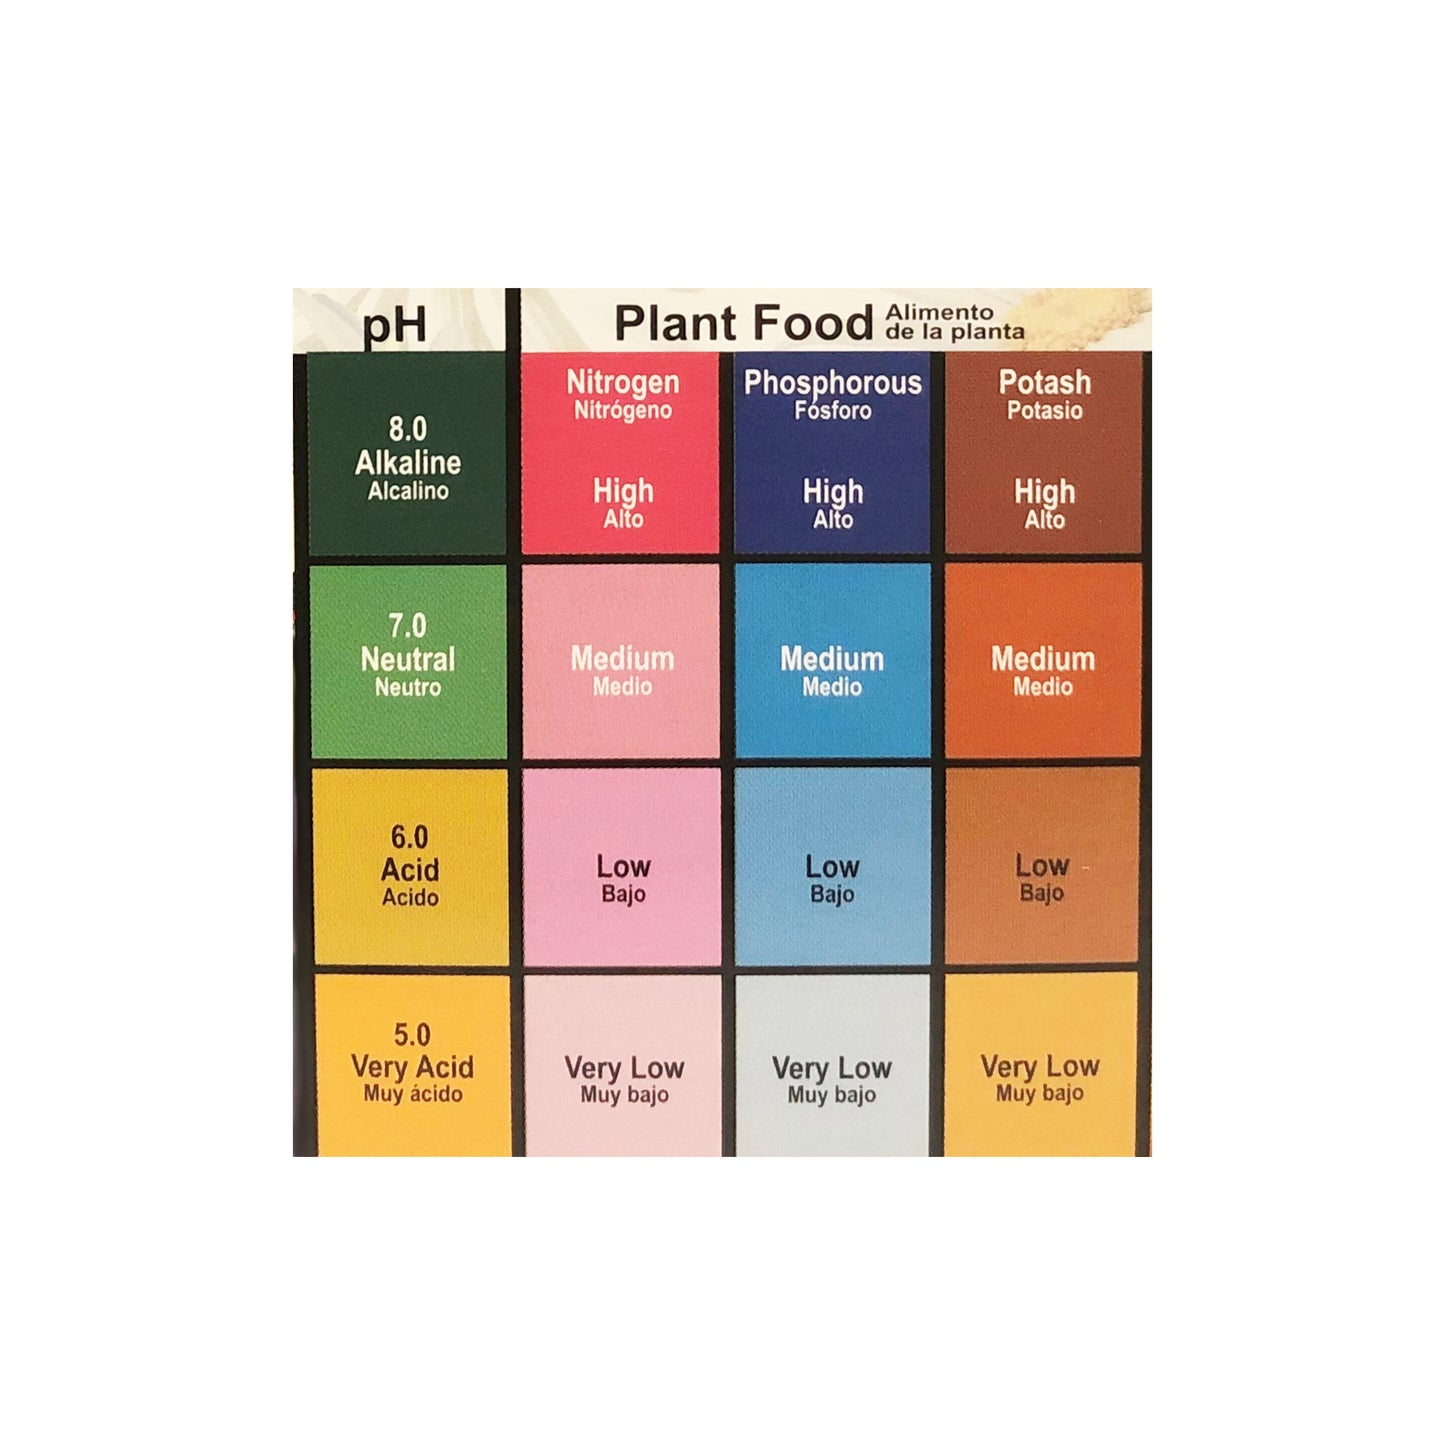 pH and plant food soil testing chart